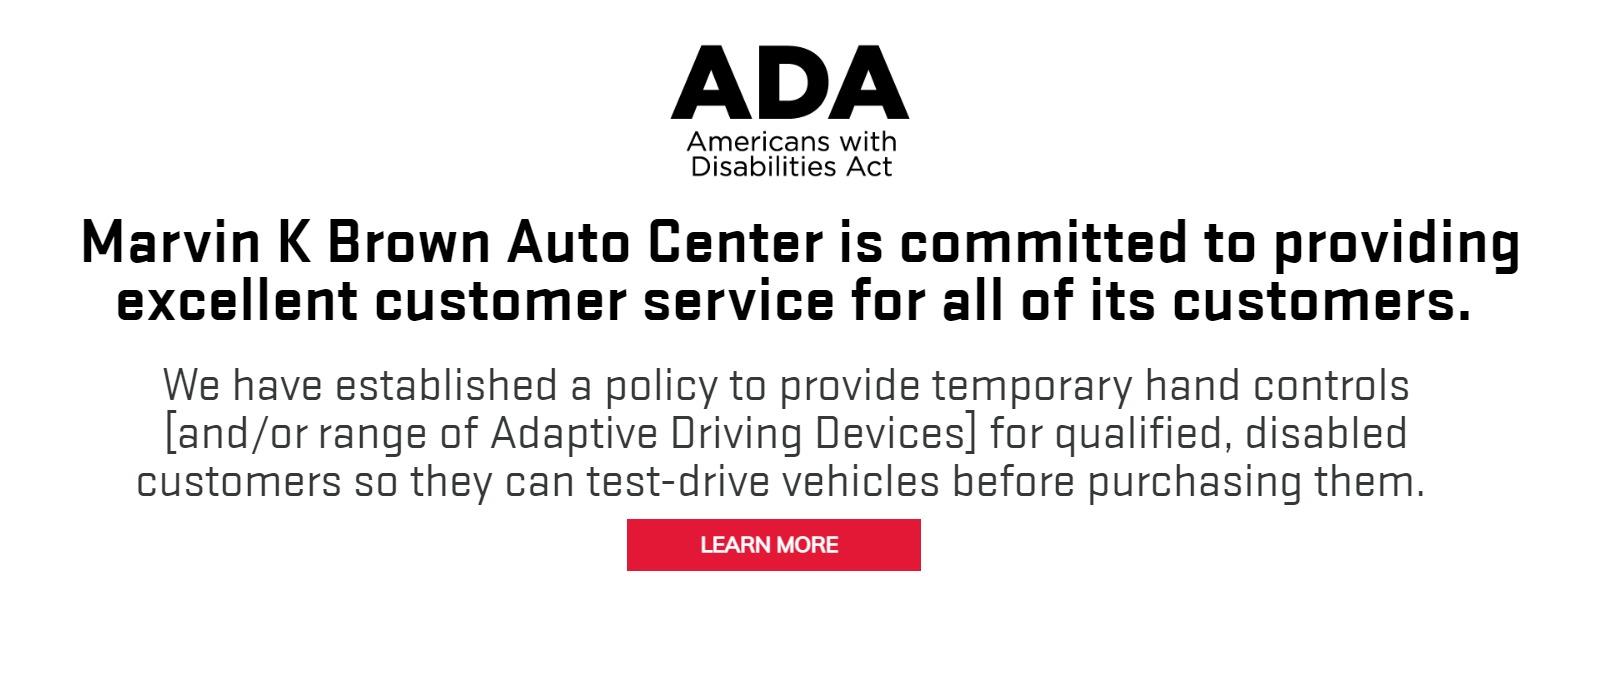 MKB ADA Test Drive Program: We have established a policy to provide temporary hand controls [and/or range of Adaptive Driving Devices] for qualified, disabled customers so they can test-drive vehicles before purchasing them.